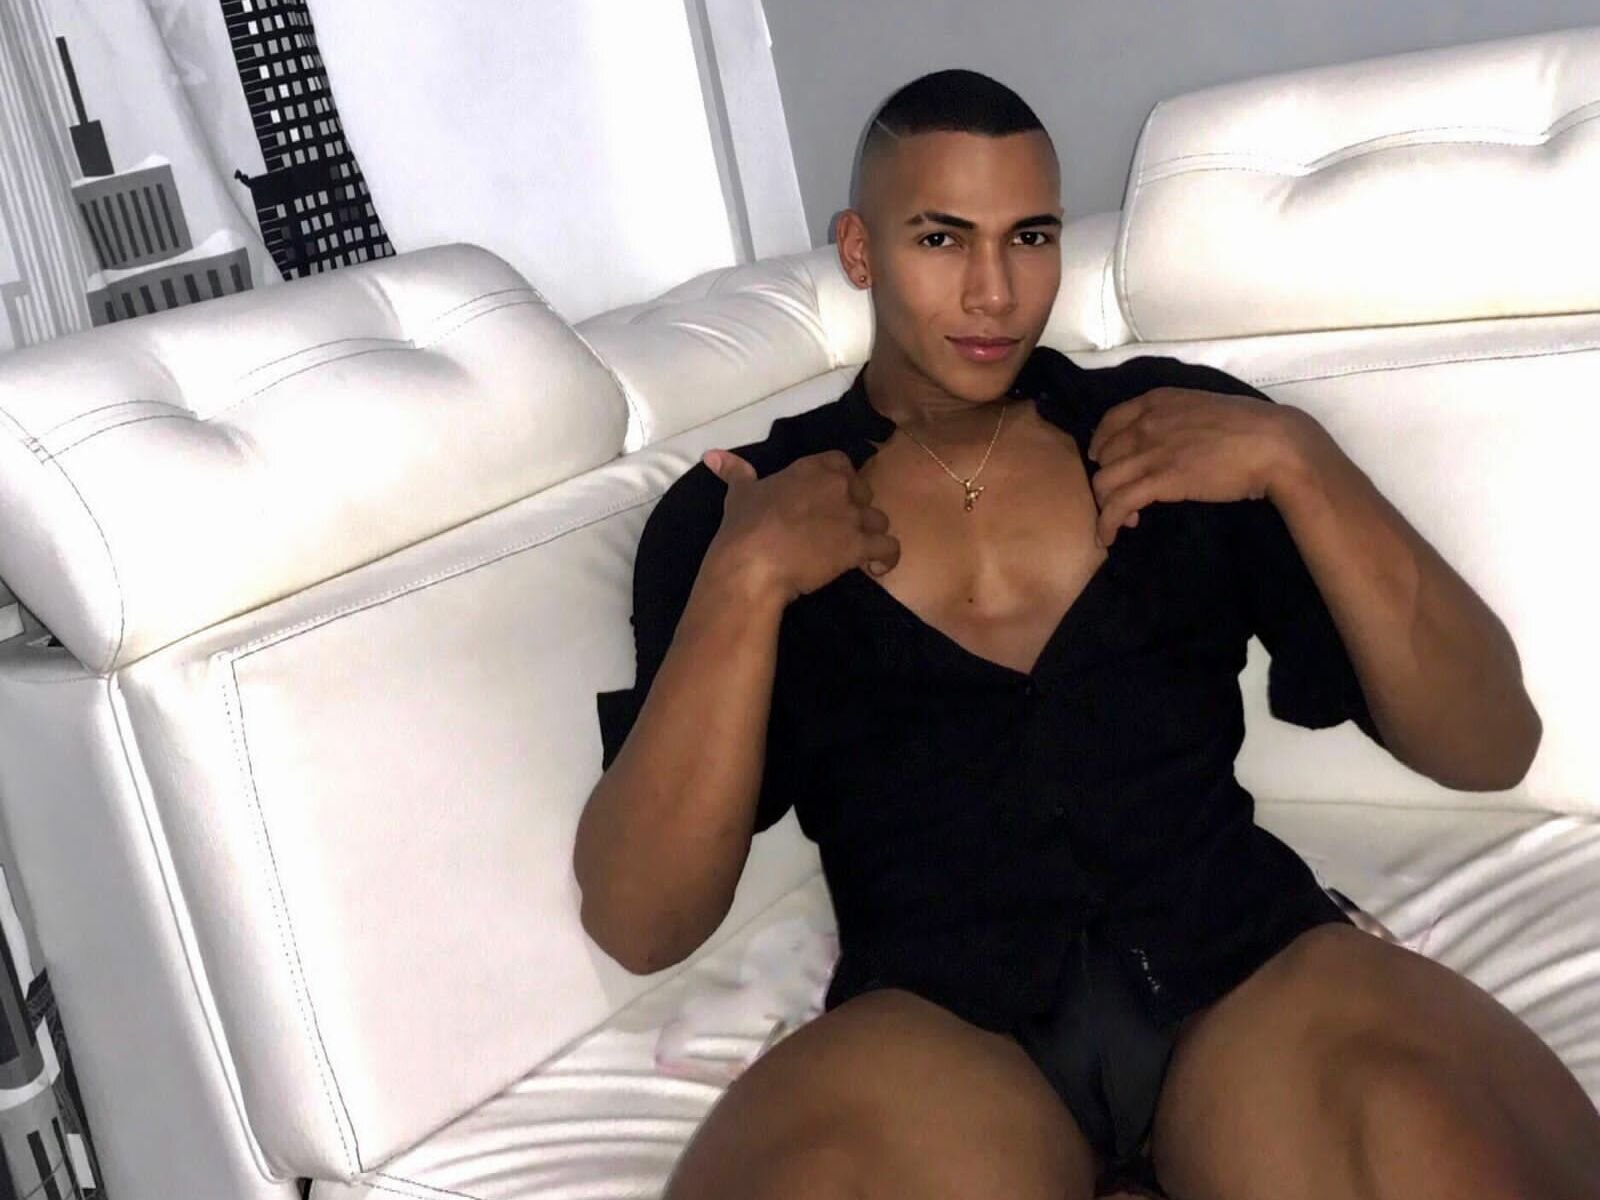 Free Live Sex Chat With DominikConnor